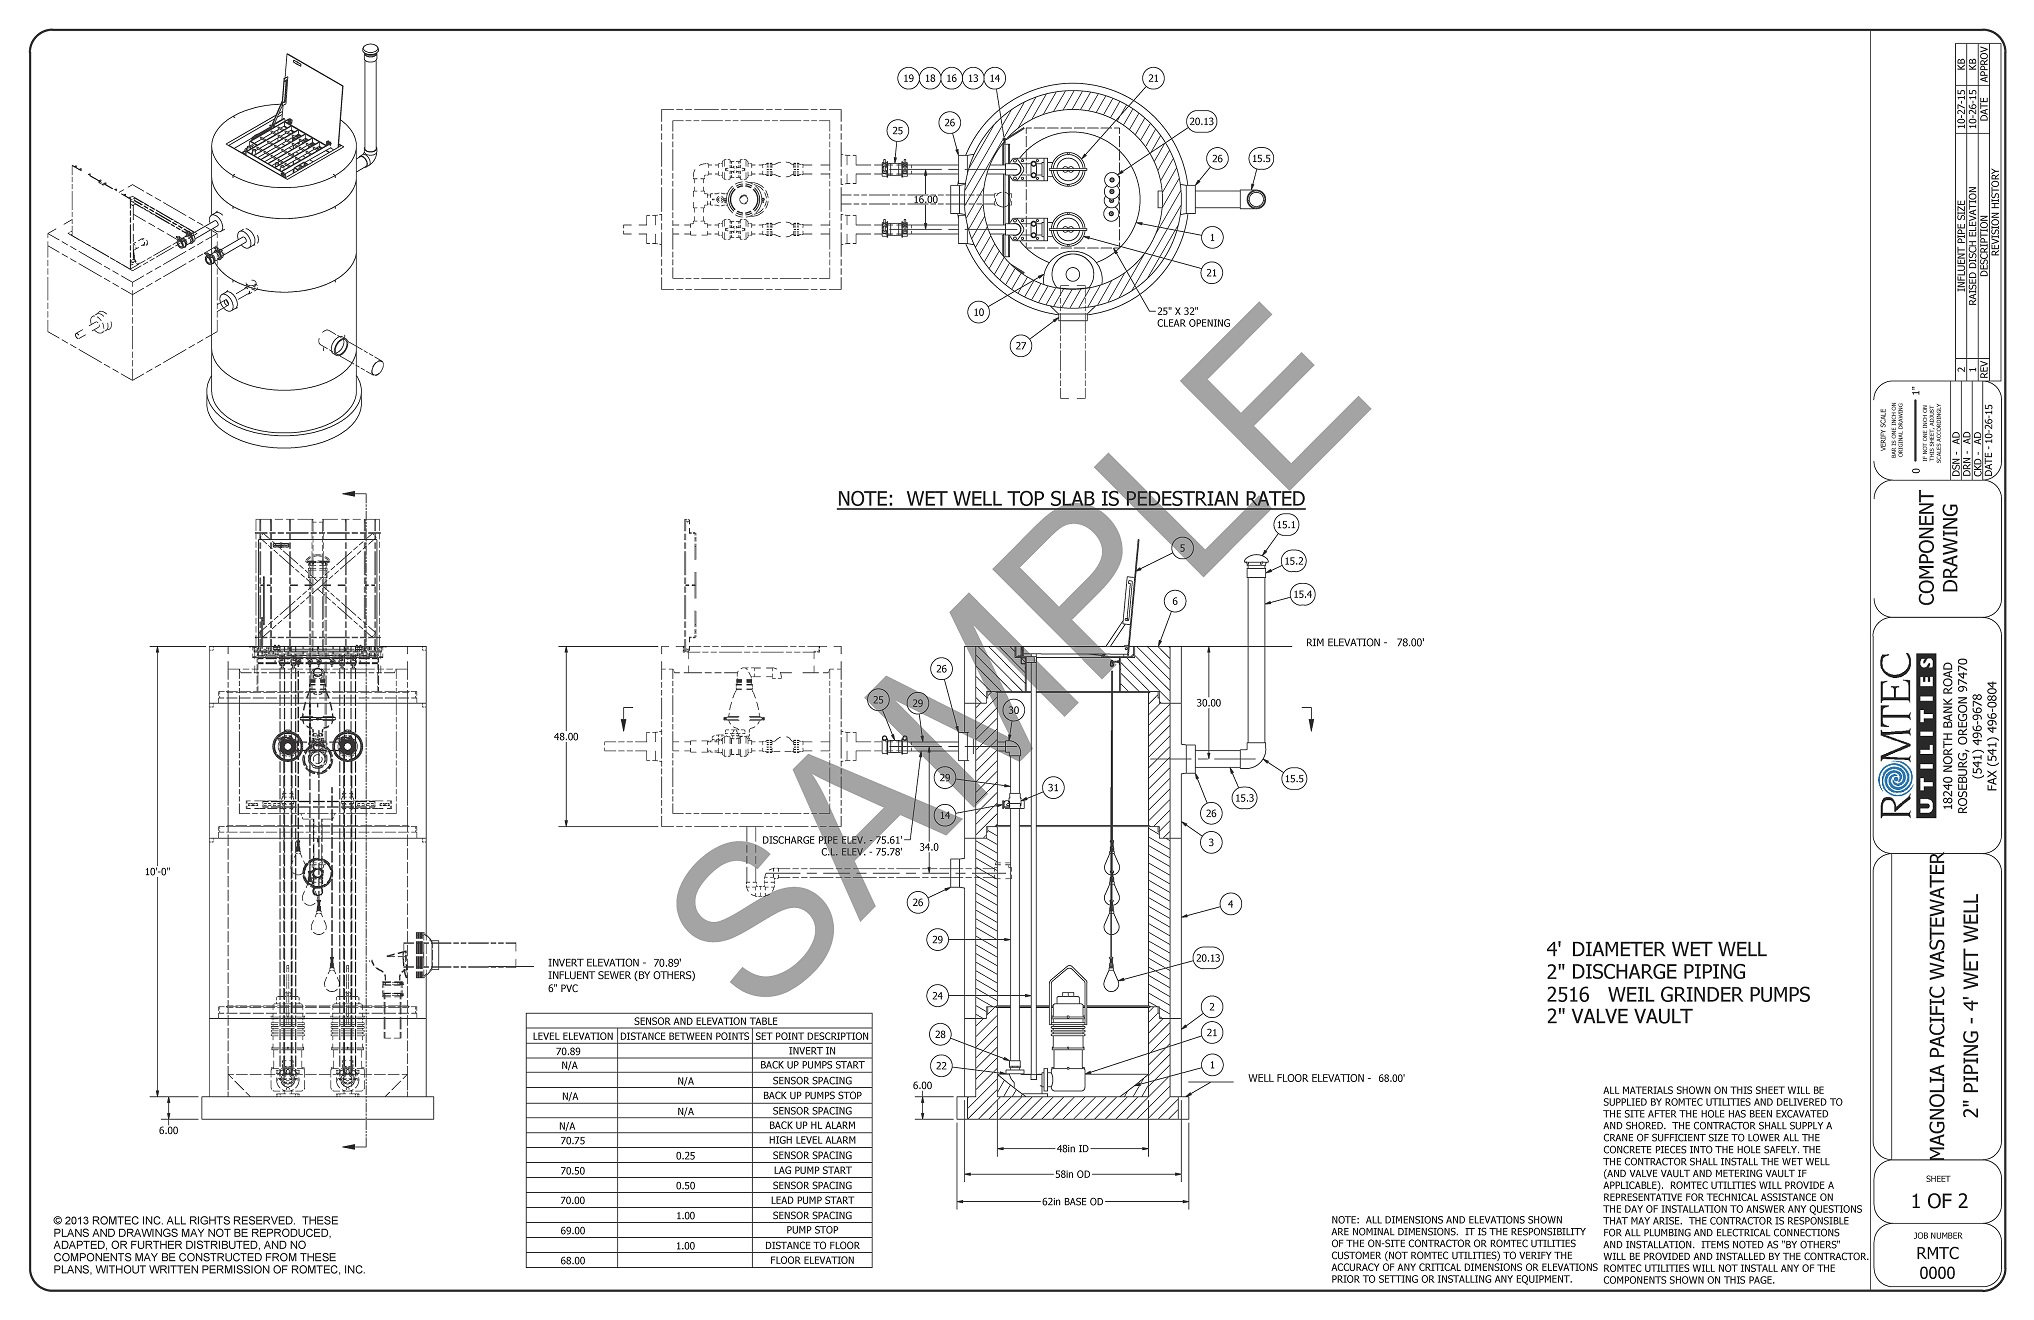 Component Drawing for Wastewater Lift Station